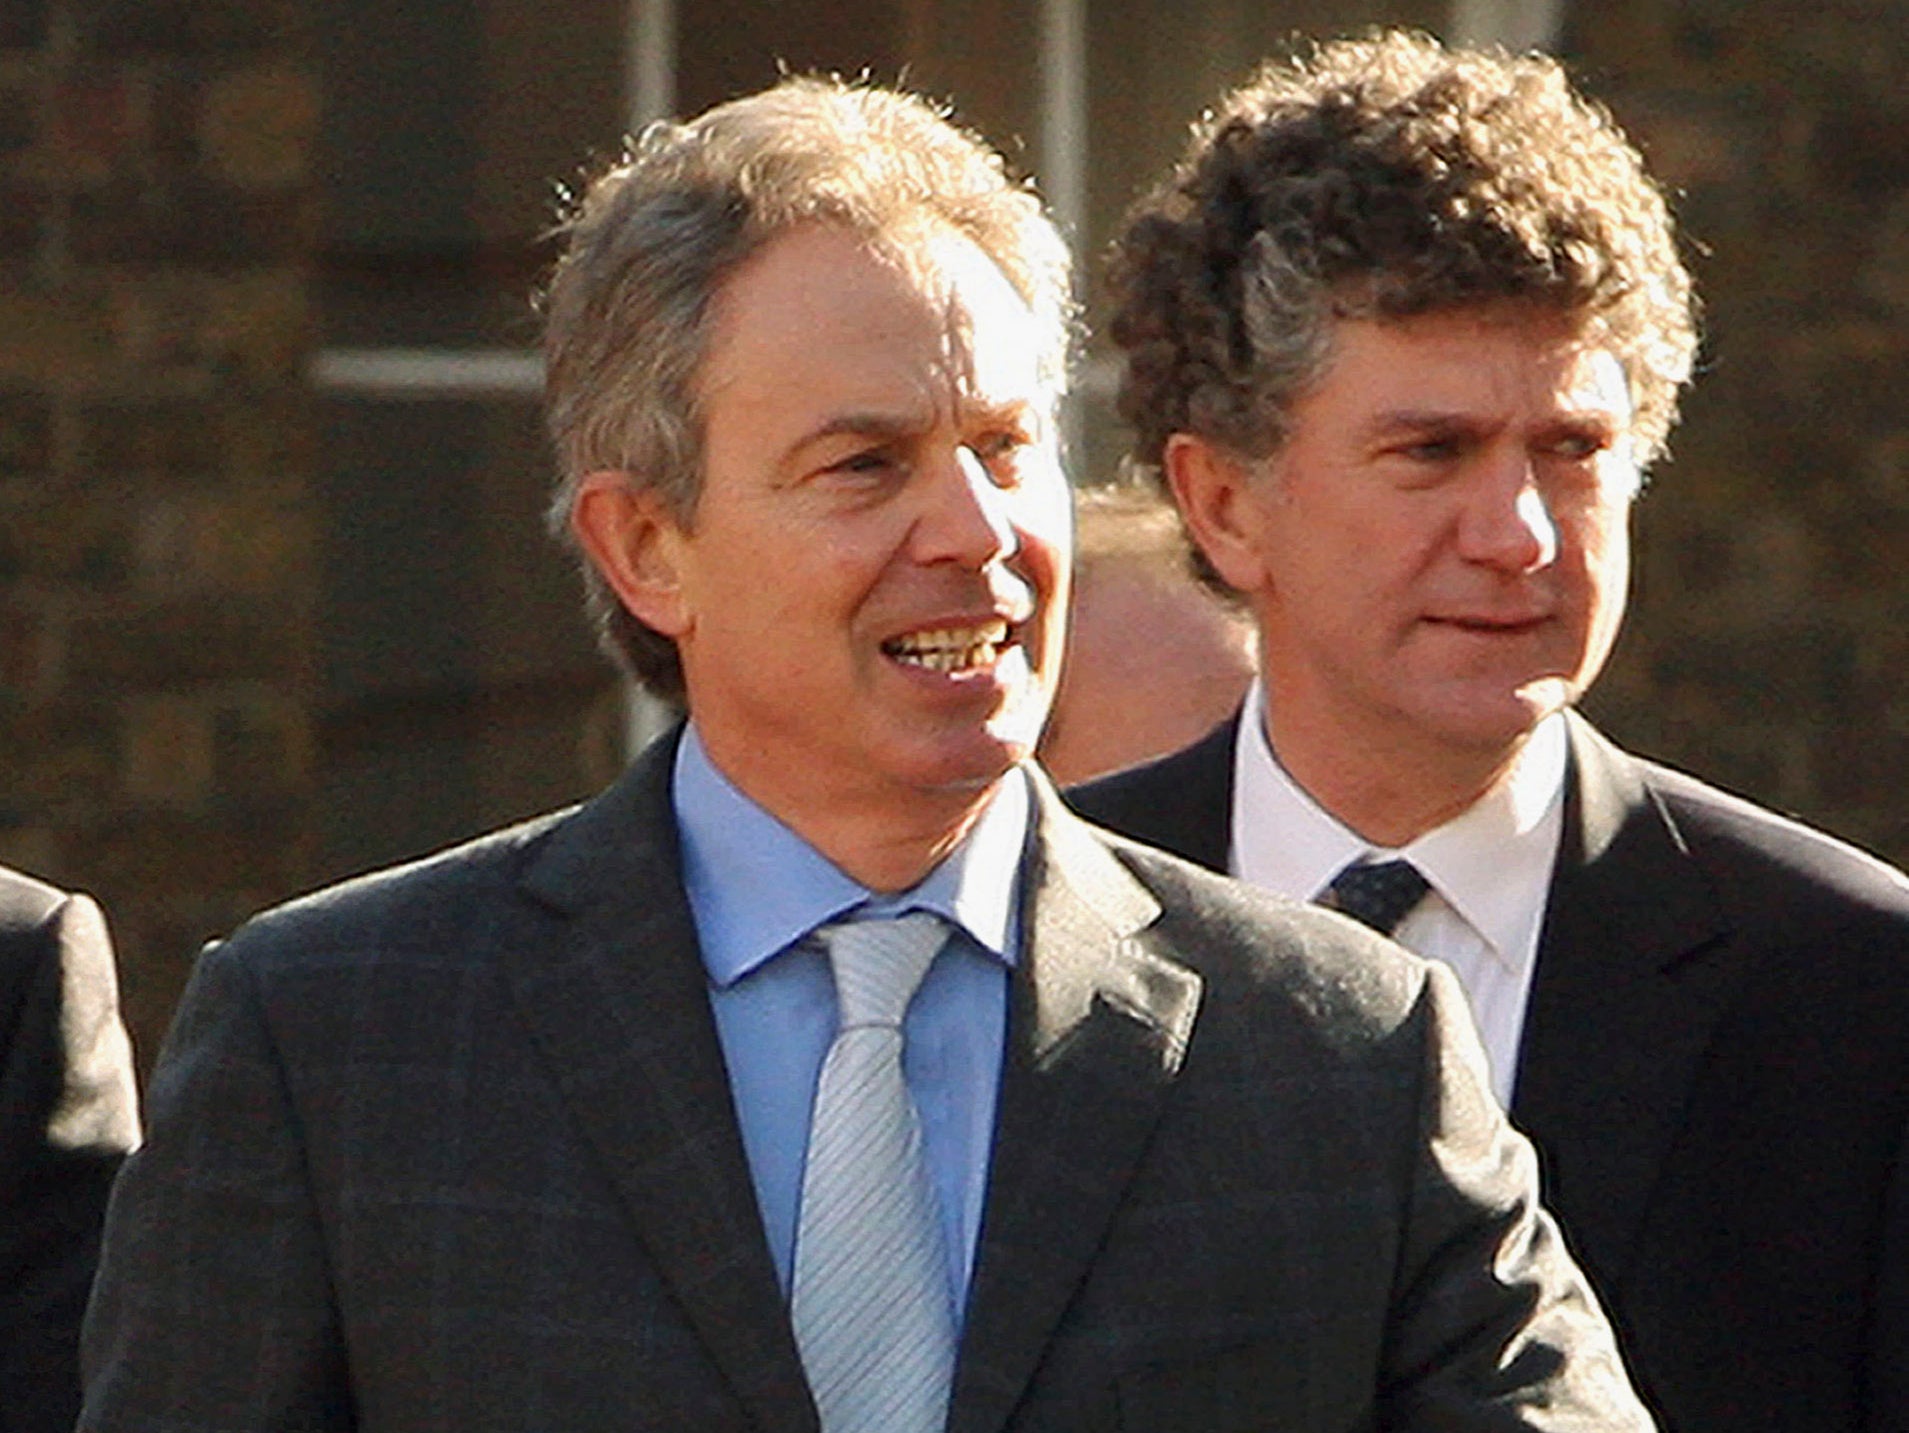 Tony Blair and Powell in 2007